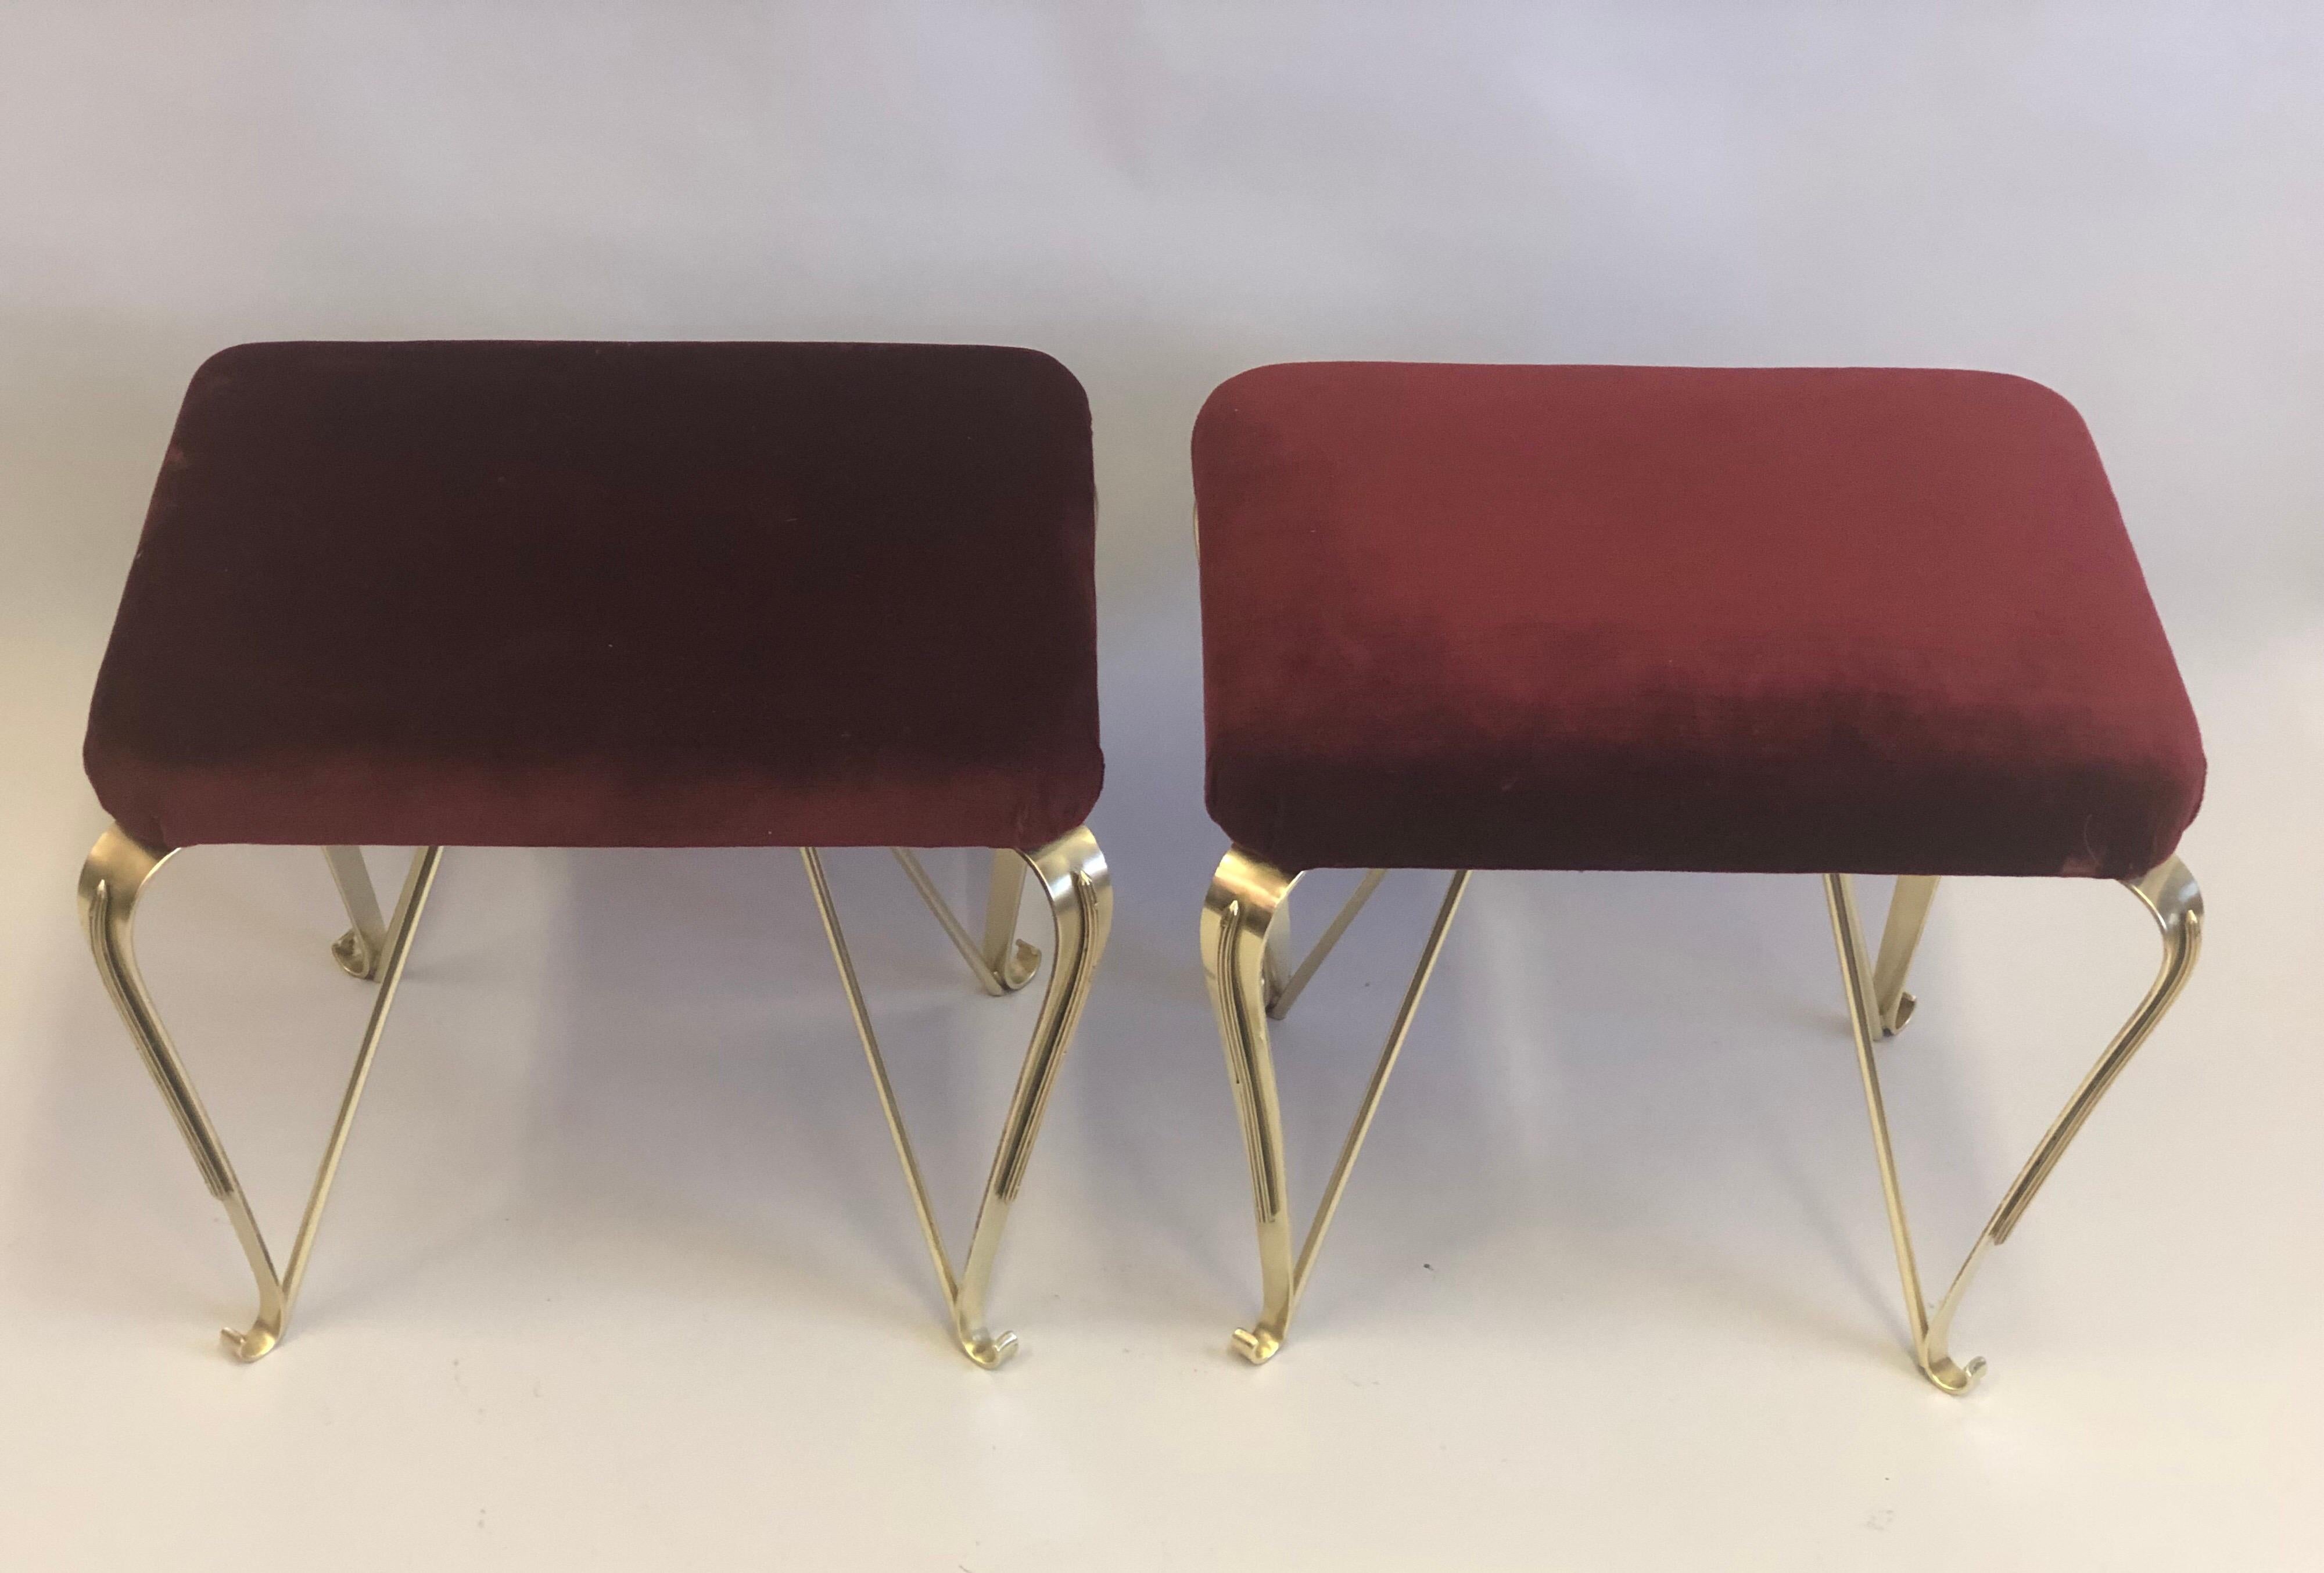 Upholstery Pair of Italian Mid-Century Modern Neoclassical Solid Brass Benches by Jansen For Sale